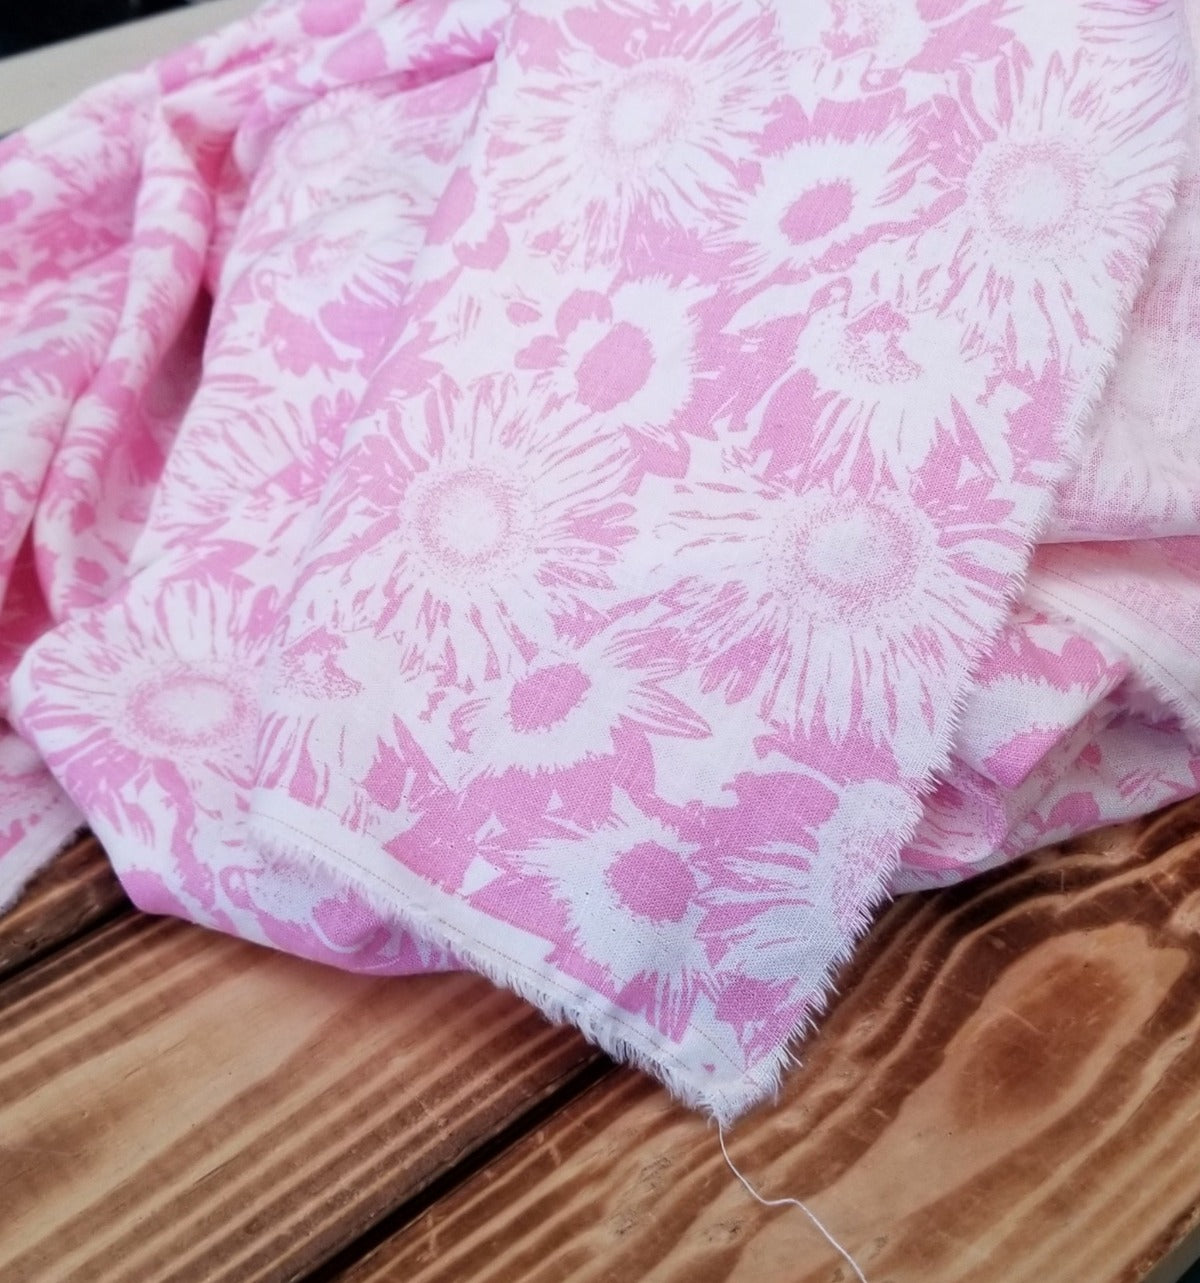 End of Bolt: 4-7/8th yards of Linen Blend Deadstock Pink and Ivory Scattered Sunflowers Florals Woven- Remnant